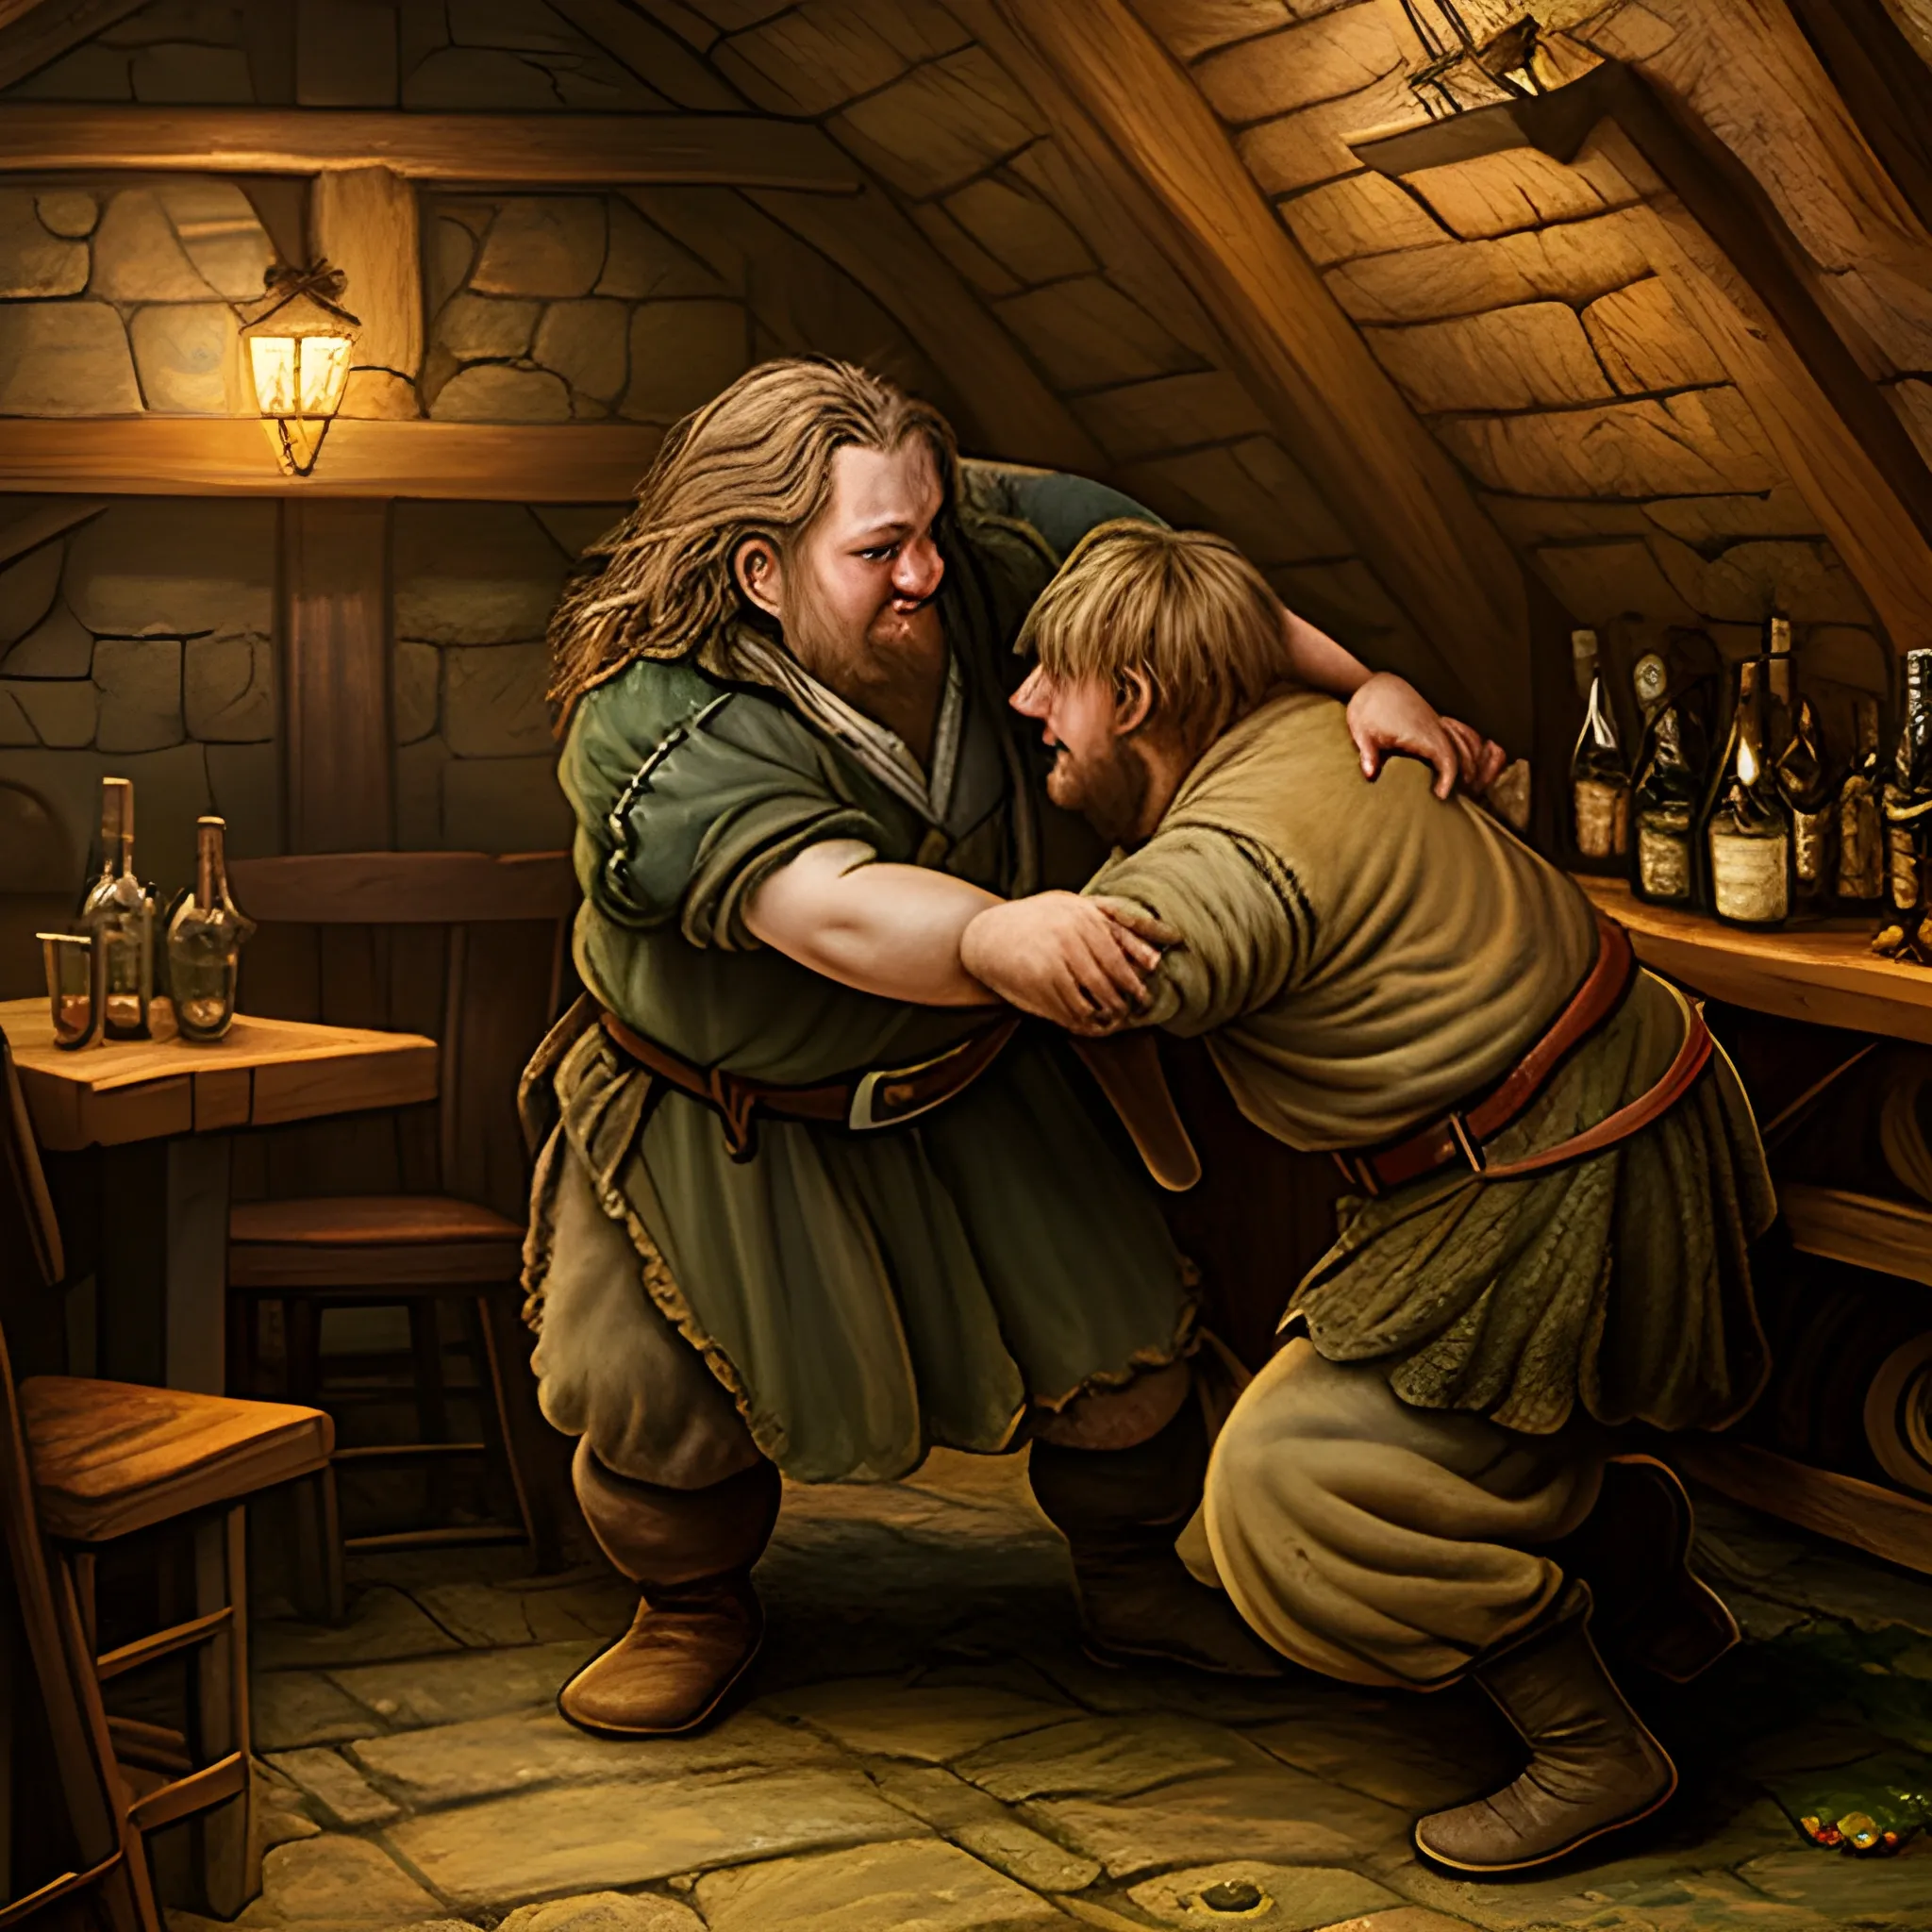 drunken hobbit grabbed by the neck by a brigand in the tavern at night, middle earth, Oil Painting